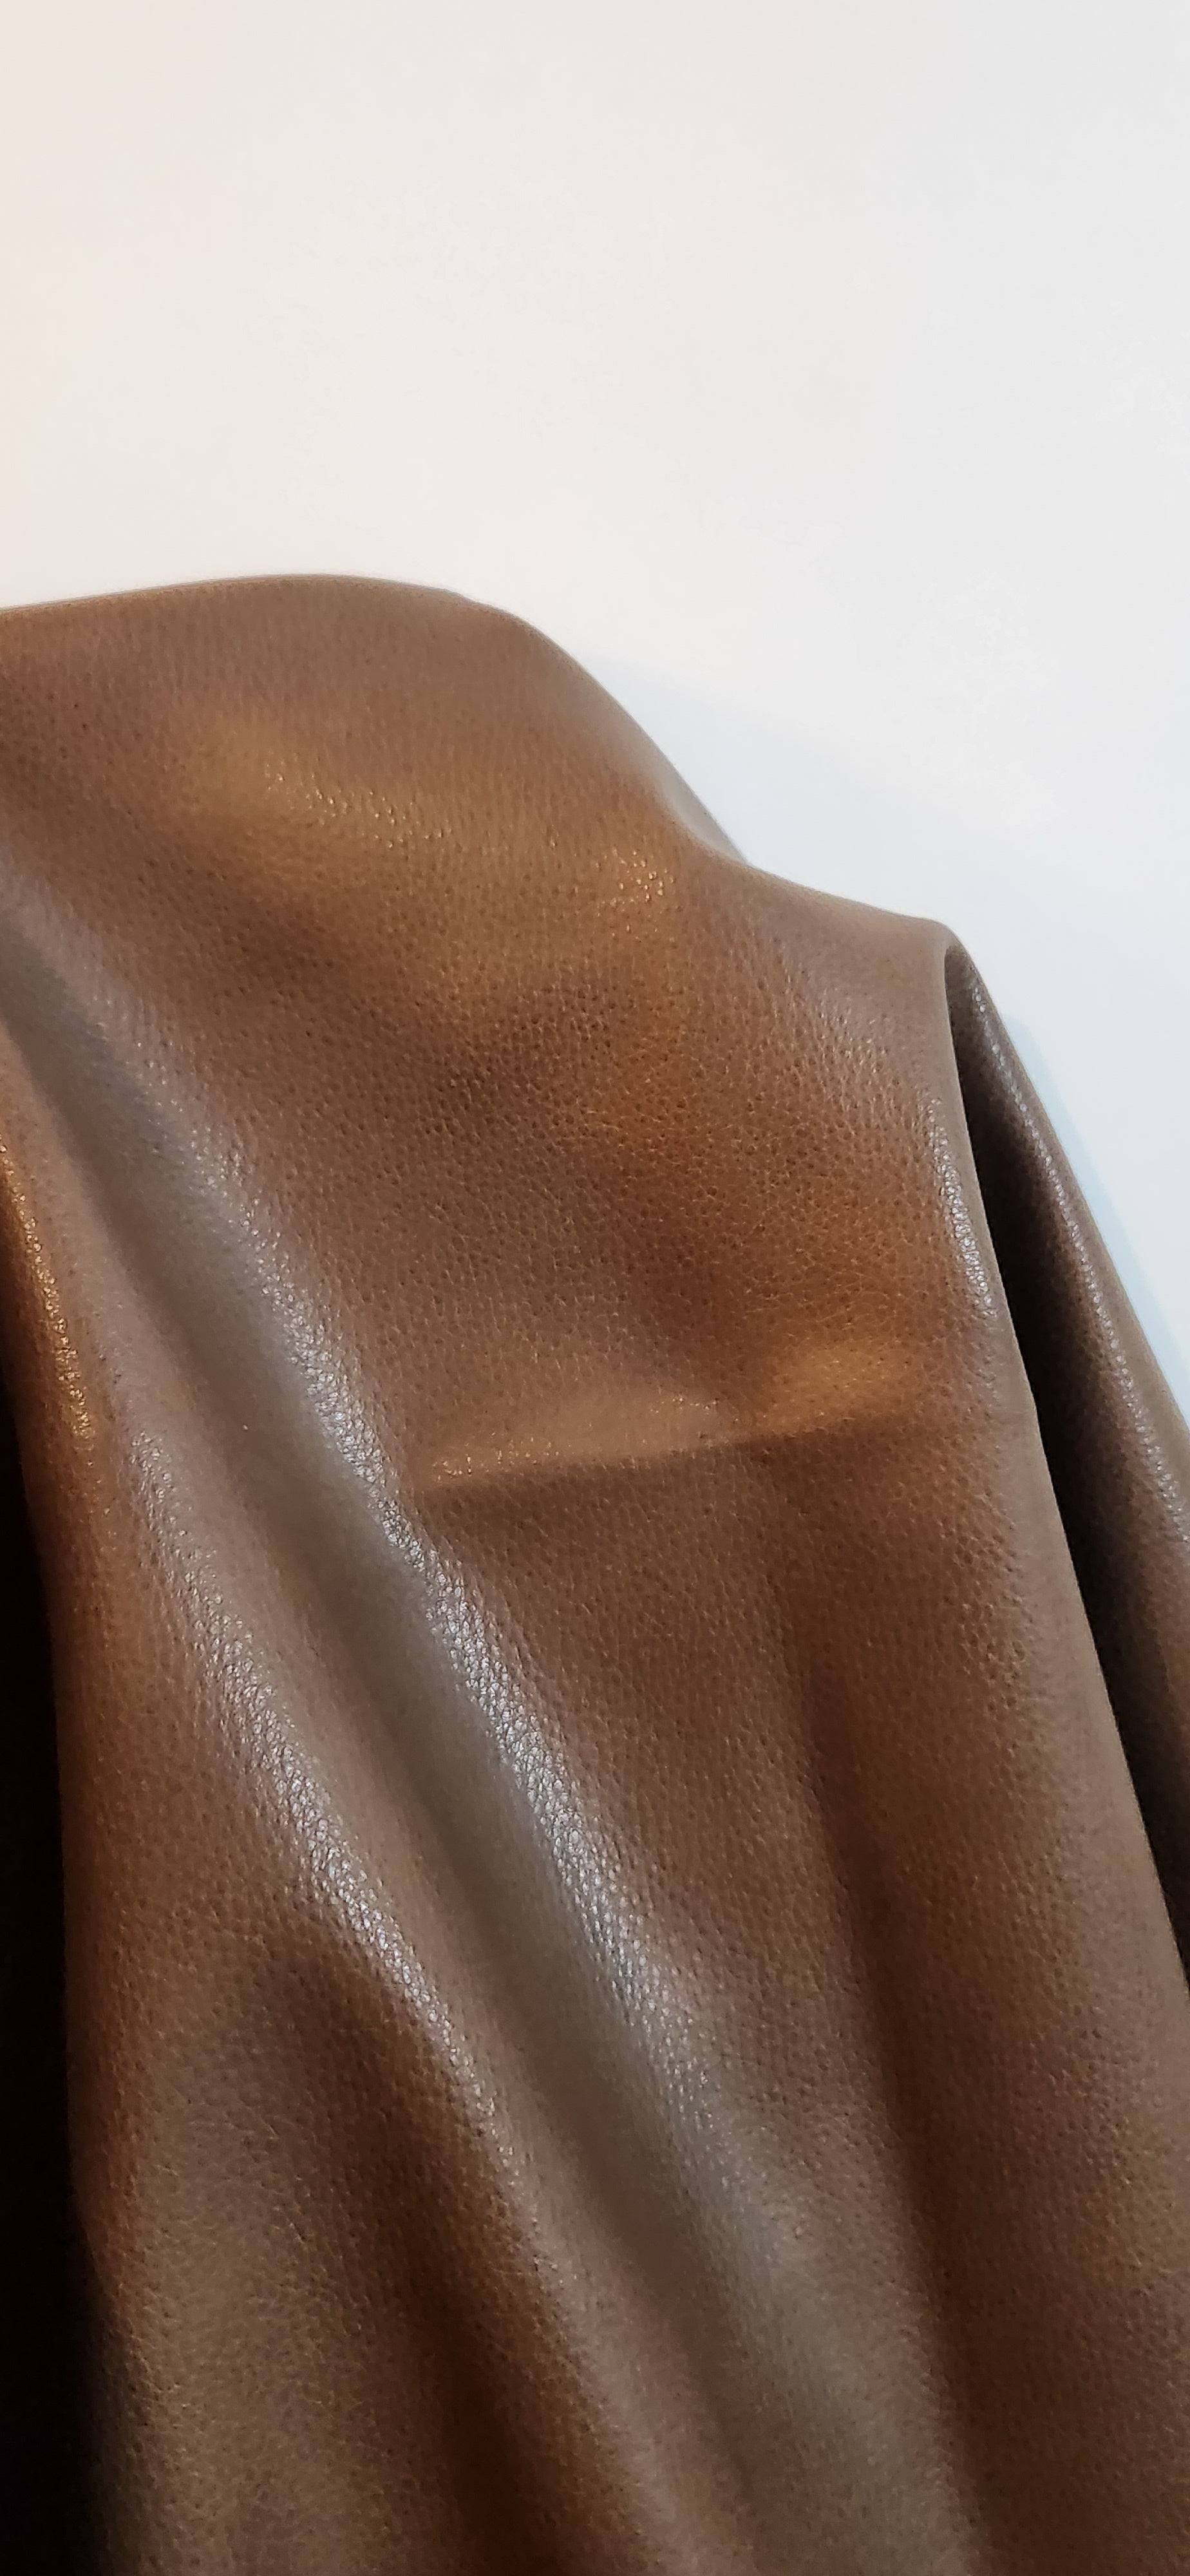 Walnut Brown Heritage collection Pebblegrain tumbled Faux Vegan leather